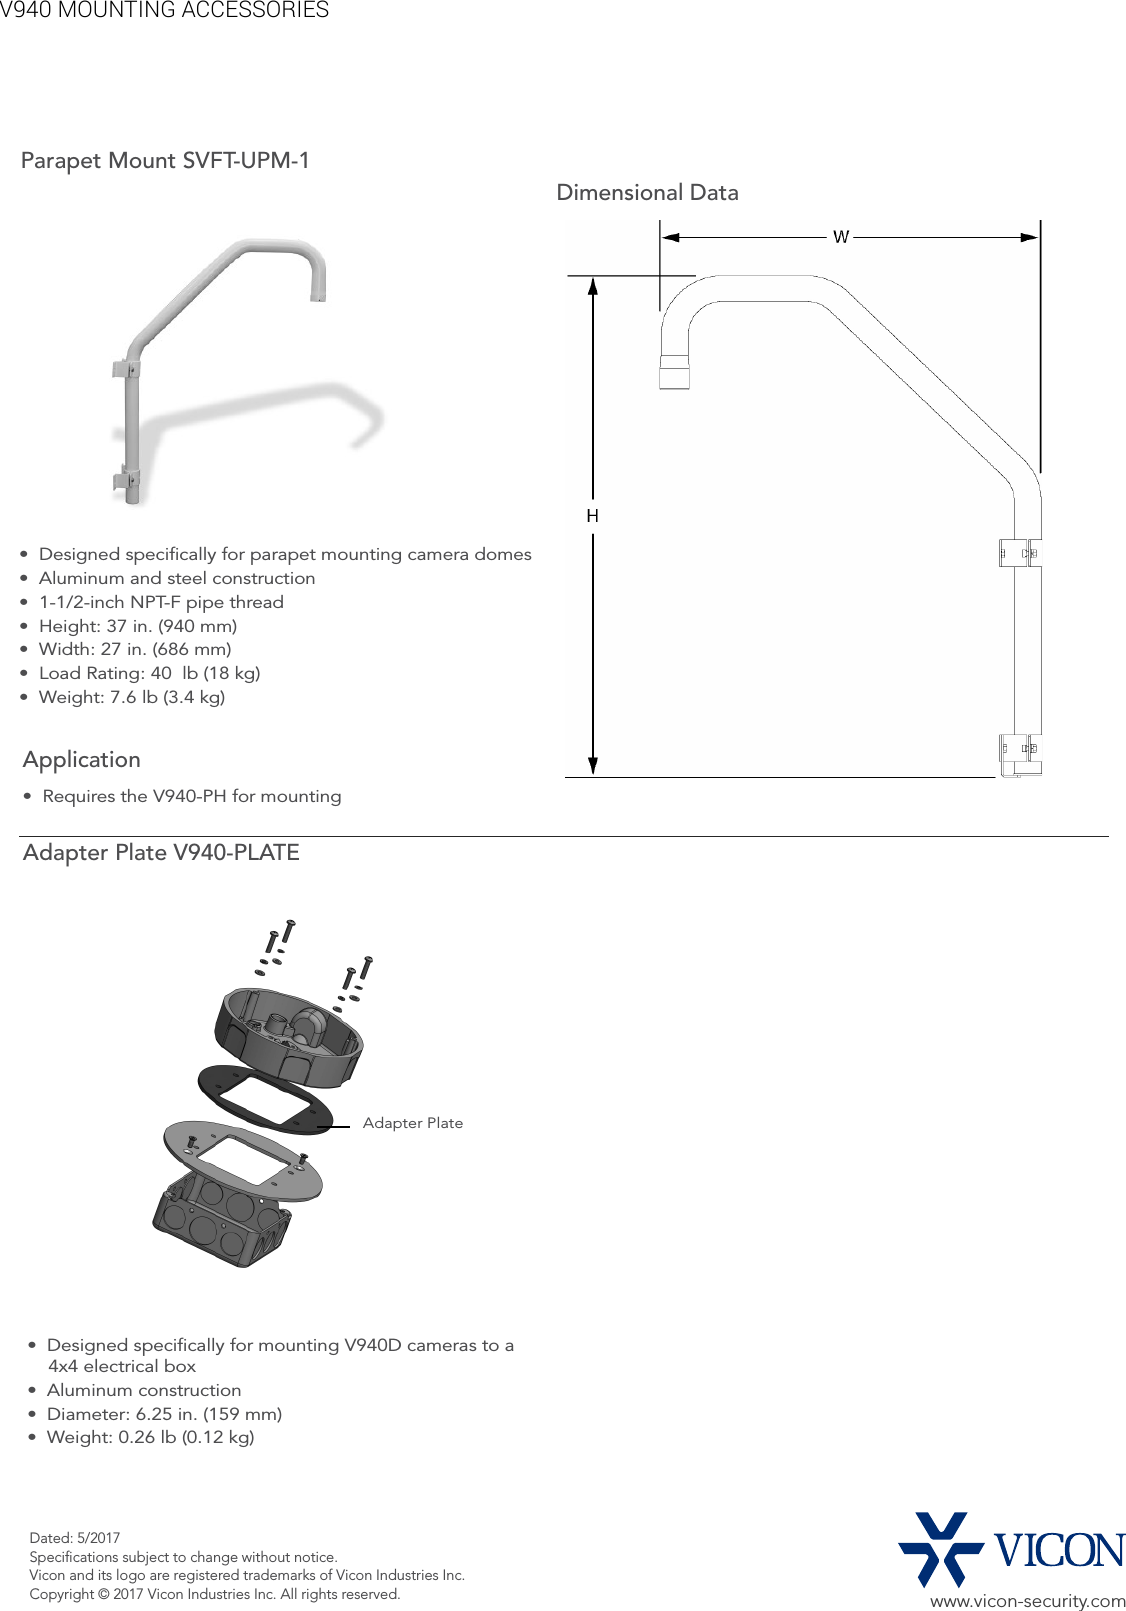 Page 4 of 6 - Security V940 Mountingaccessories User Manual Mounting Accessories